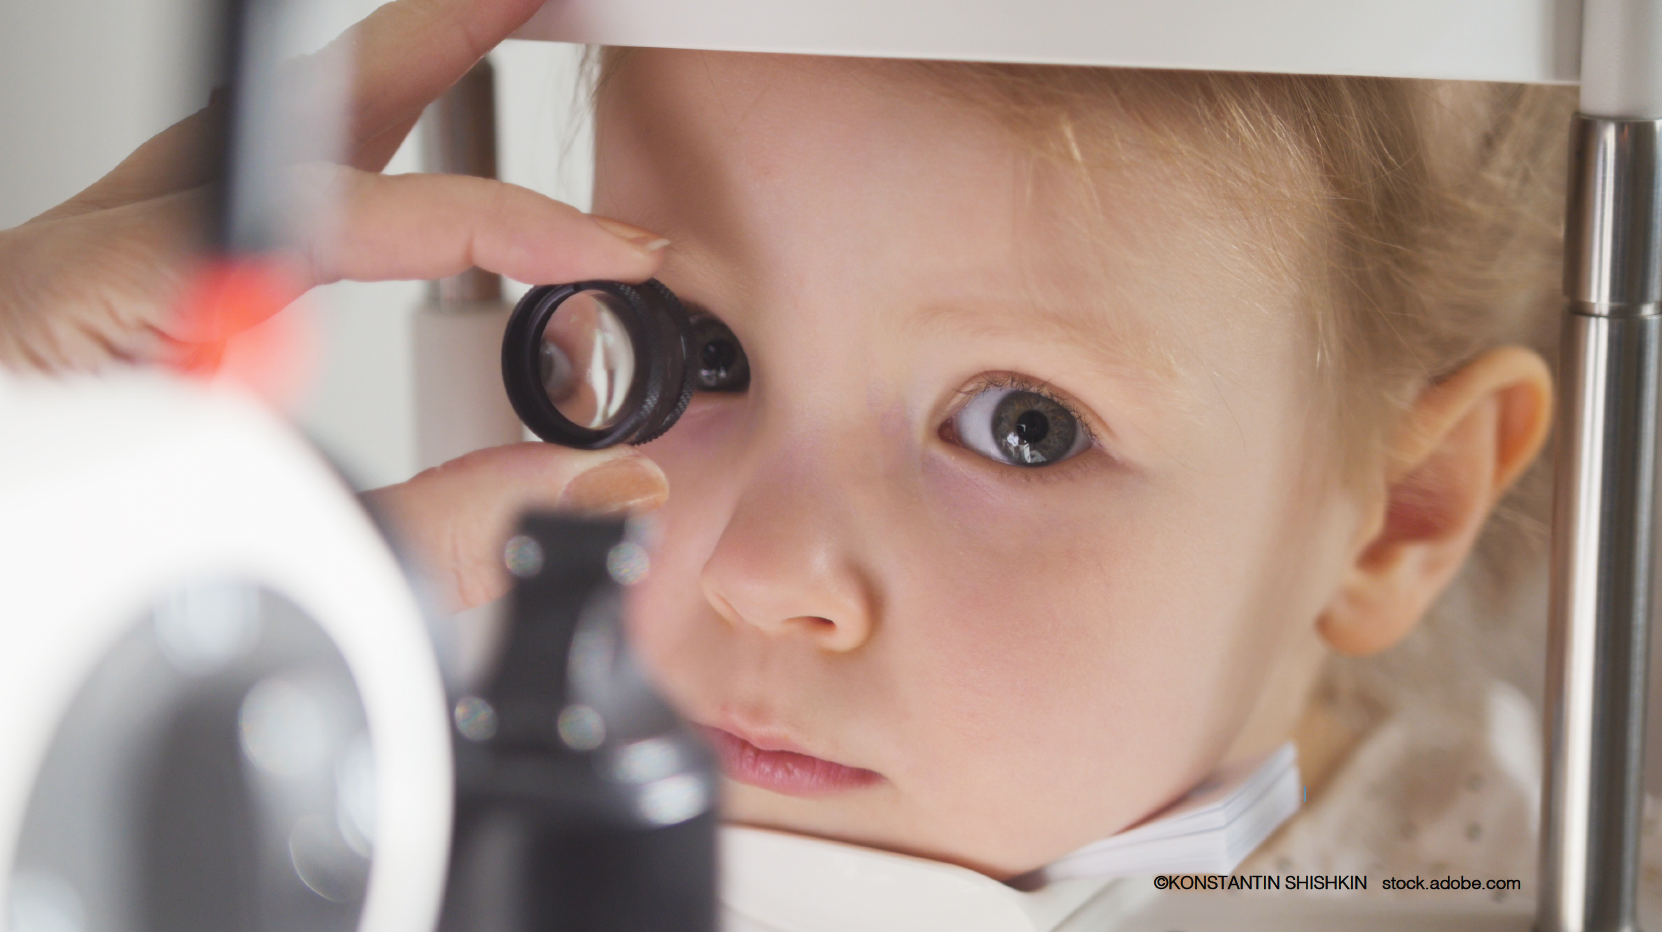 Health disparities: Impact of the pandemic on paediatric ophthalmic visits